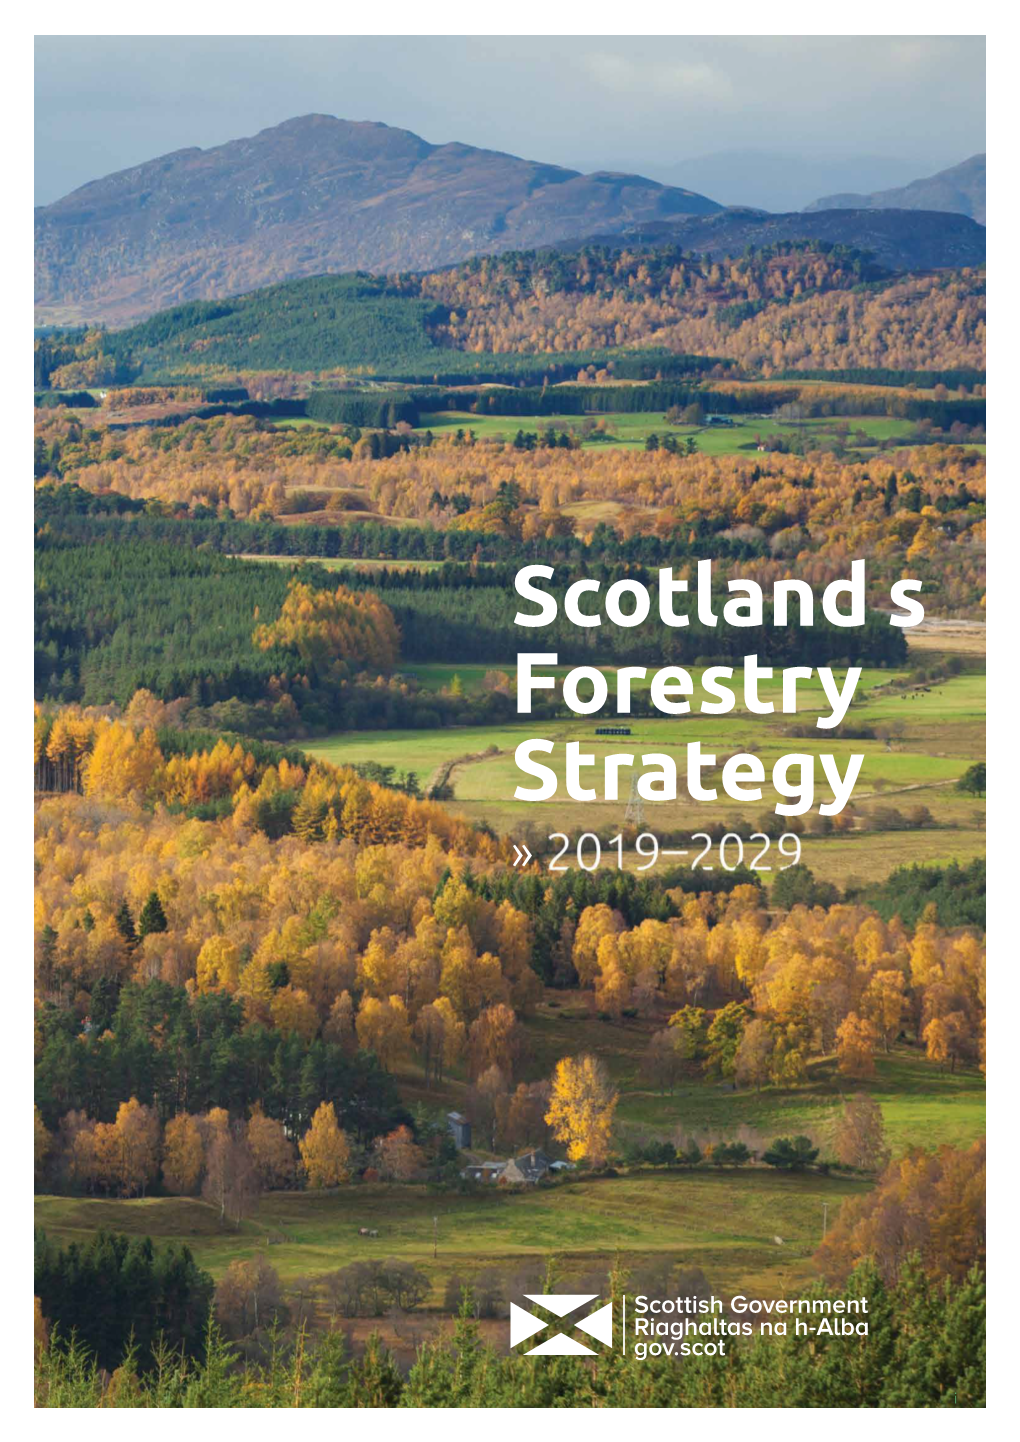 Scotland's Forestry Strategy 2019-2029